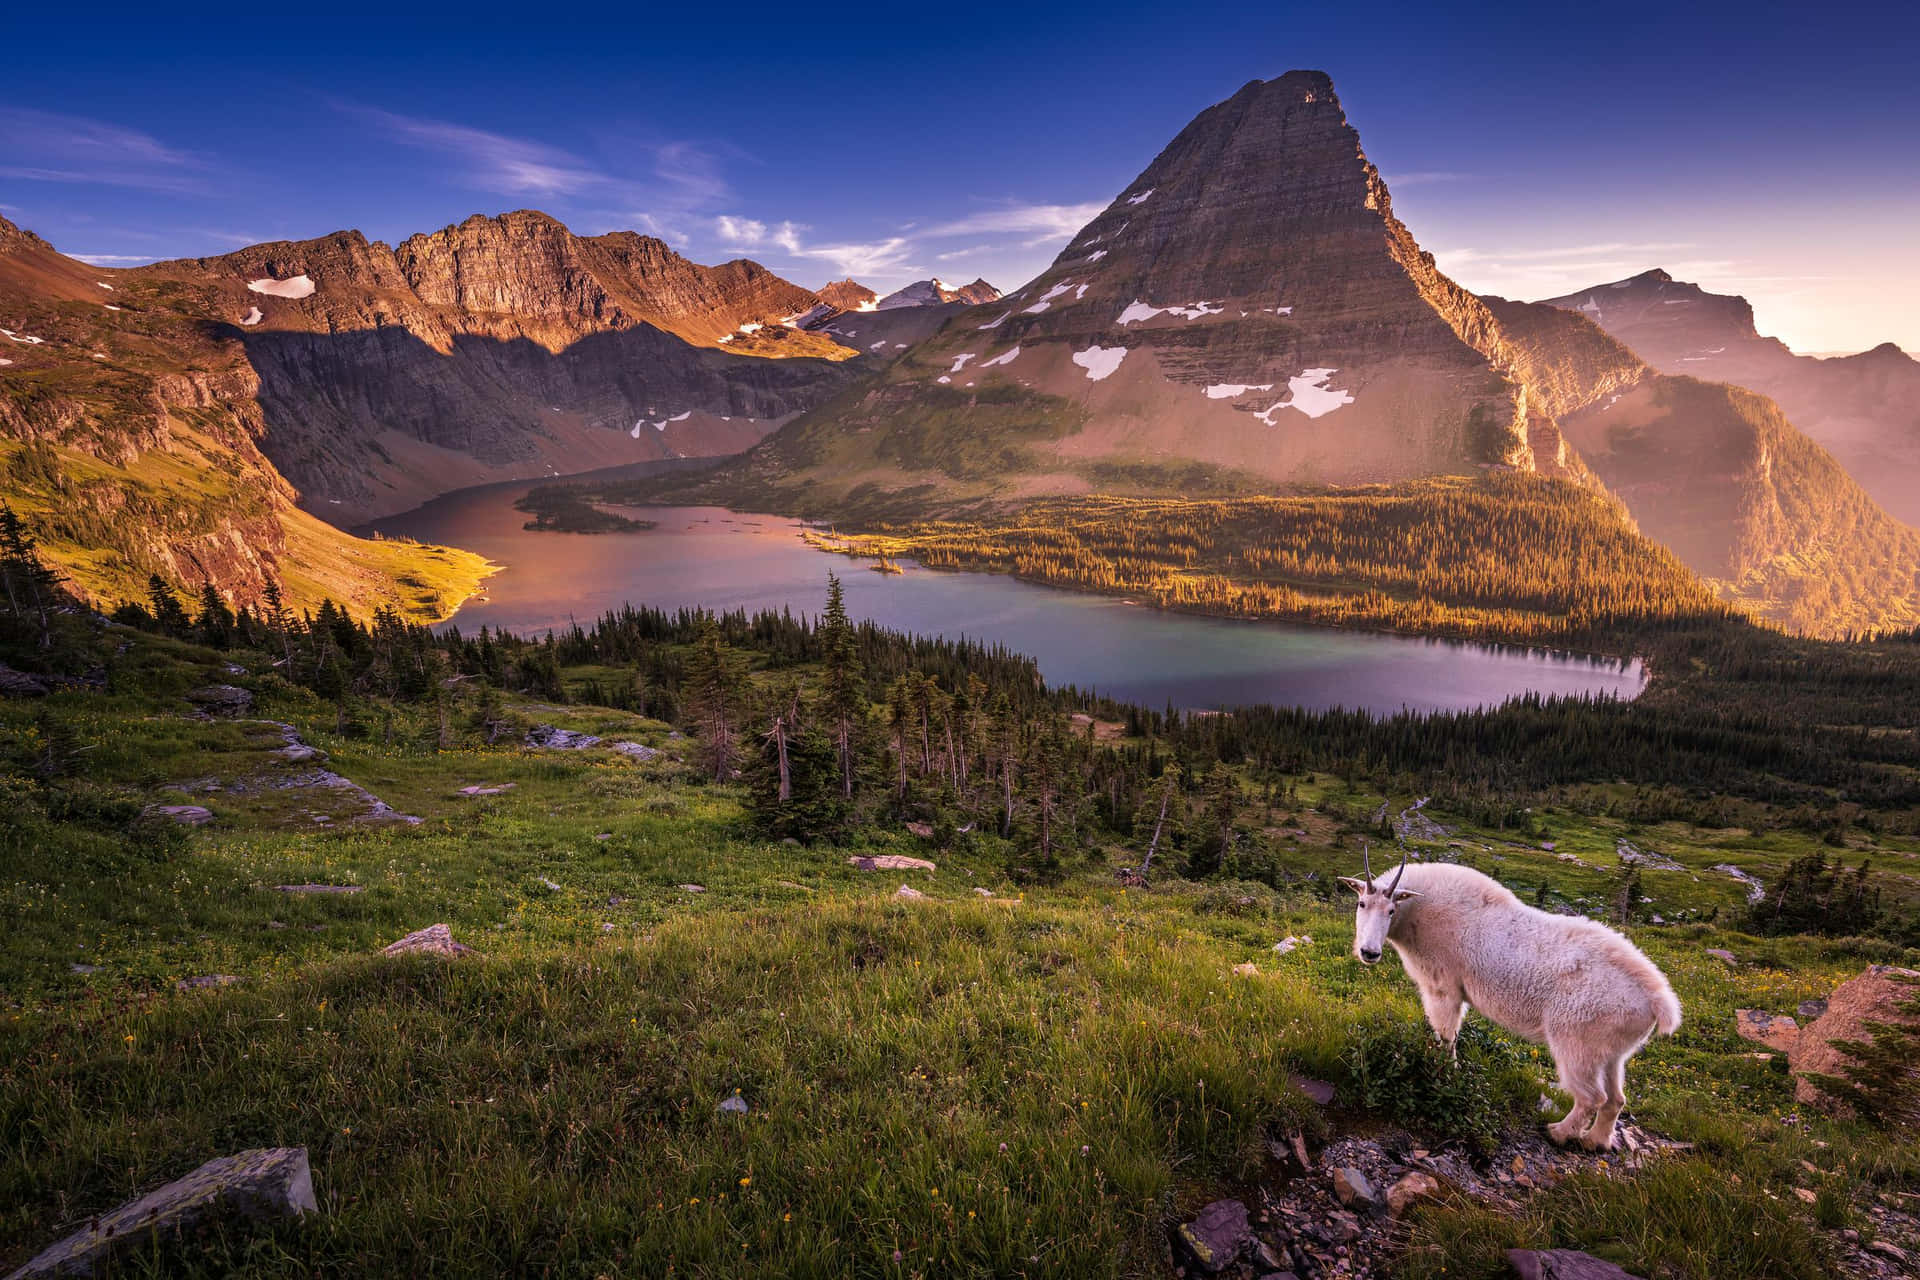 Sheep In Mountain Nature Landscape Picture